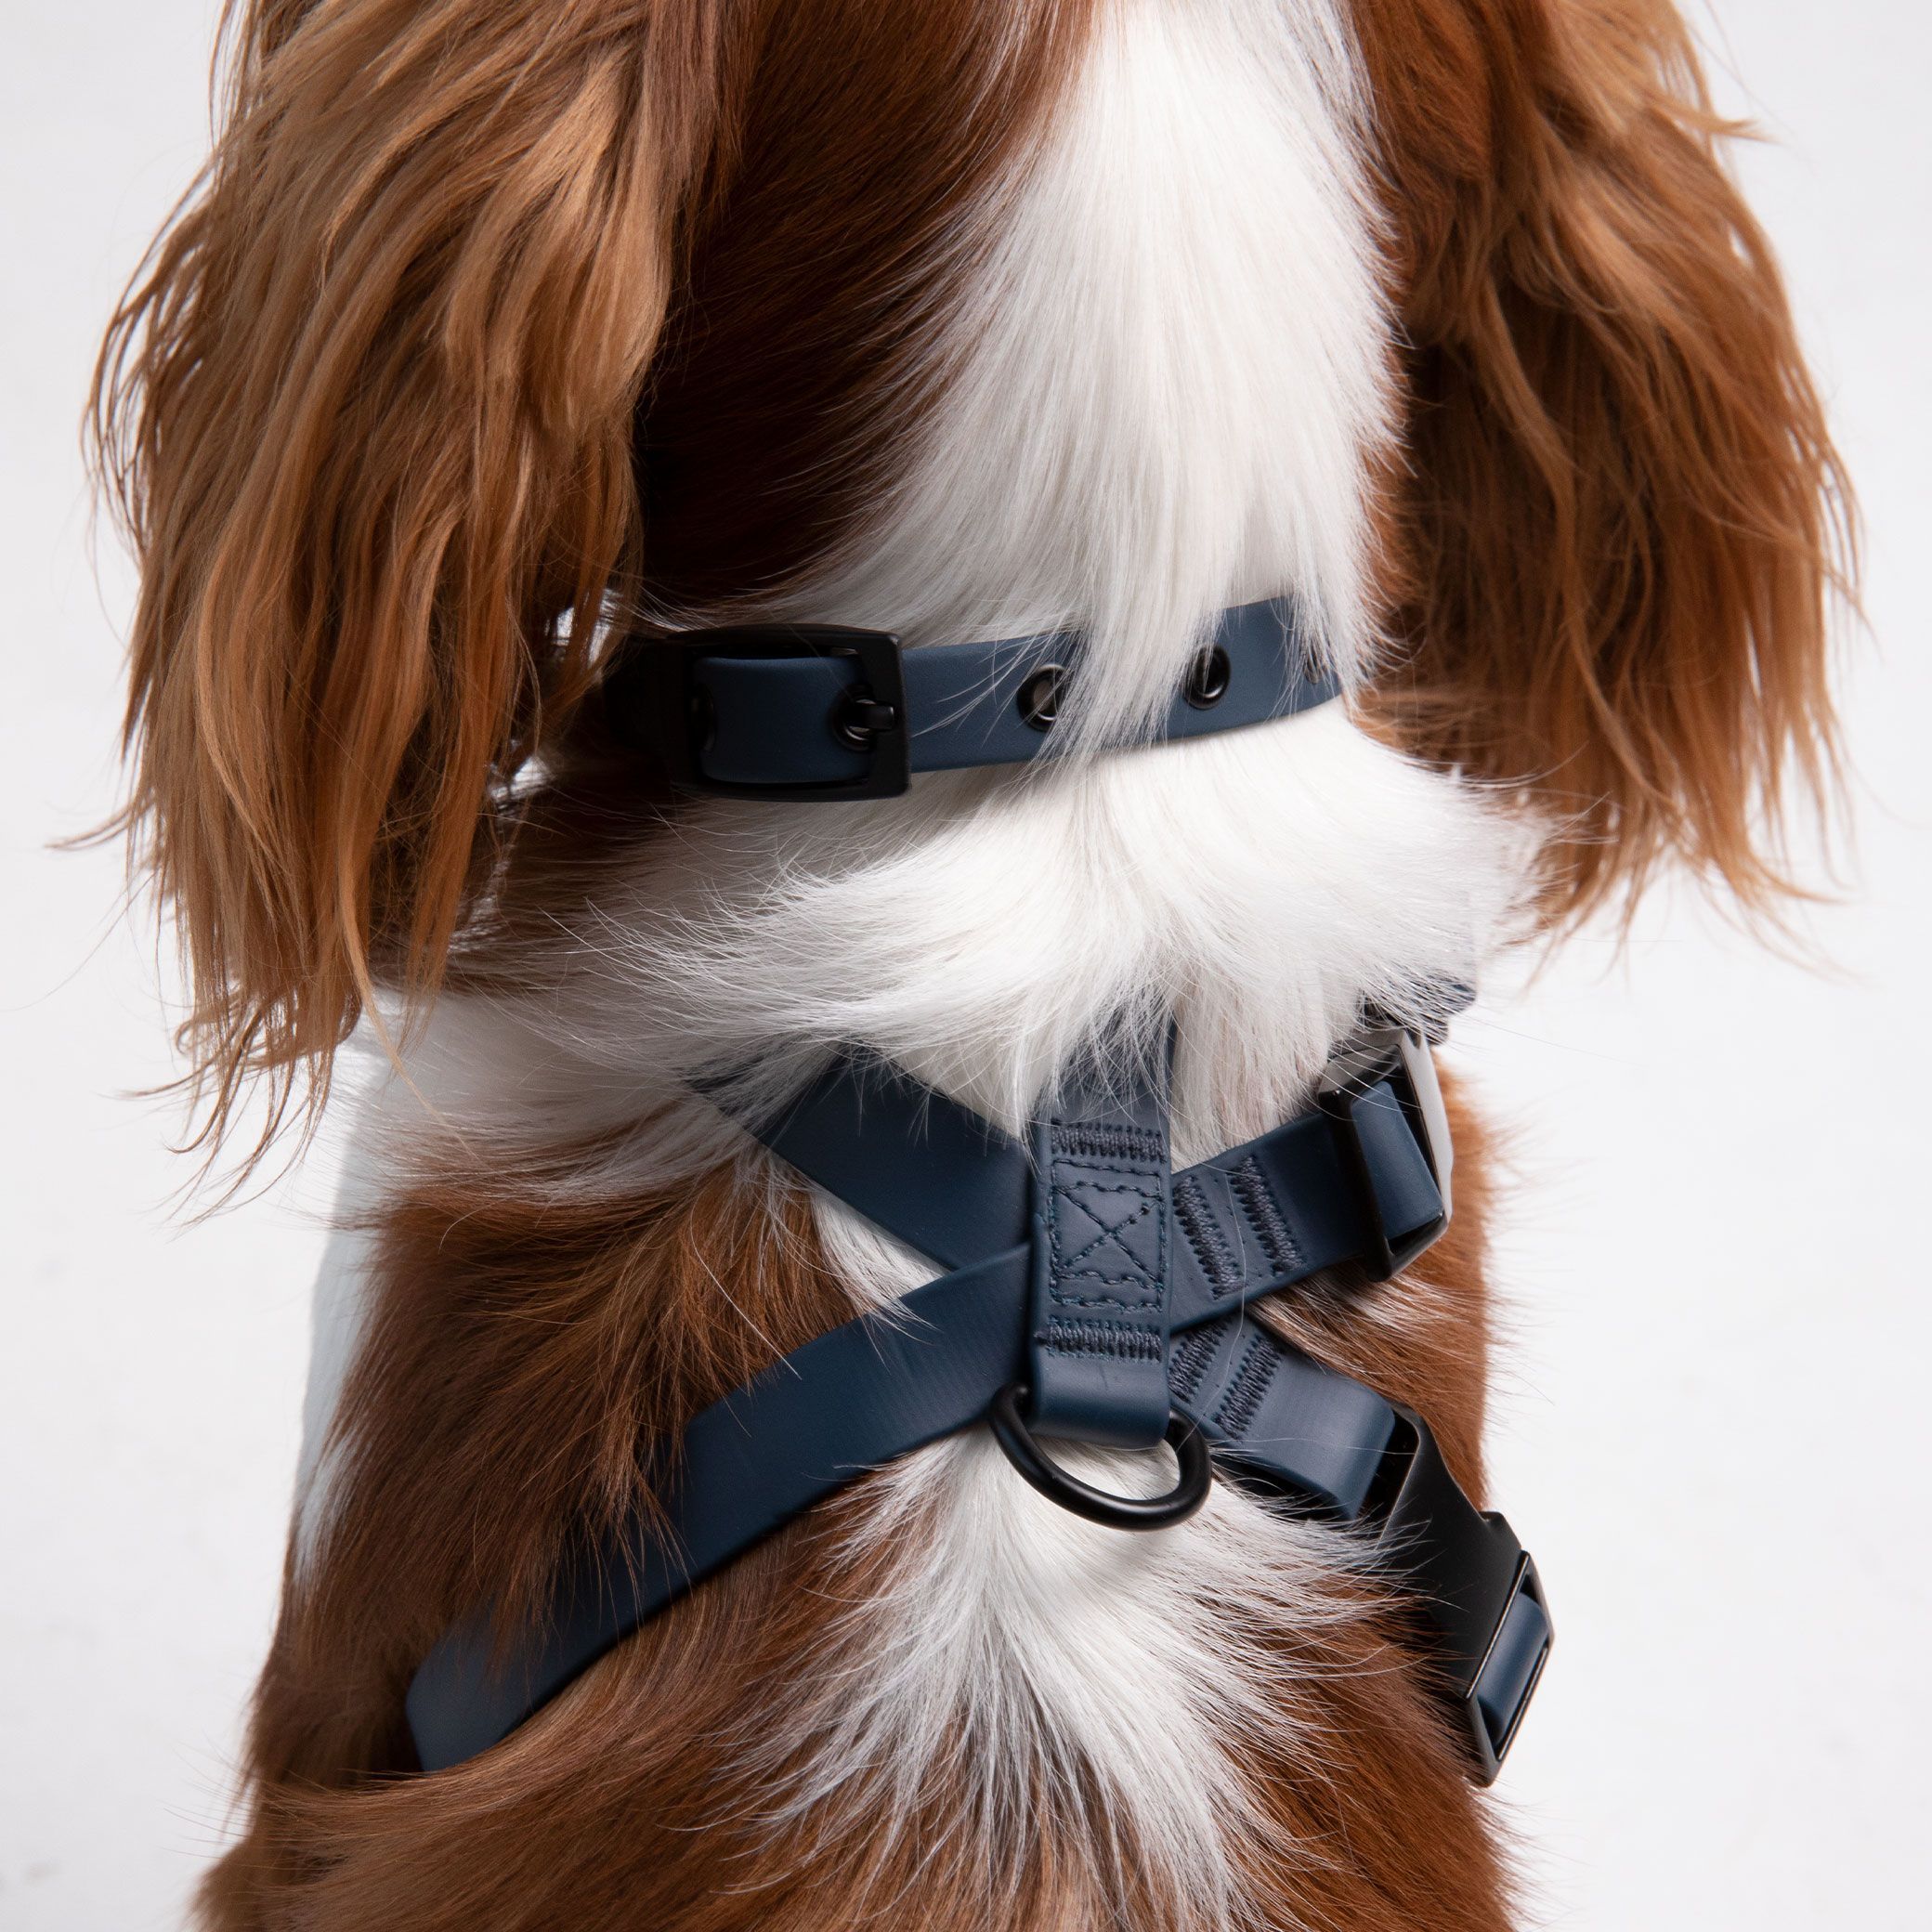 A brown and white dog wearing a blue harness